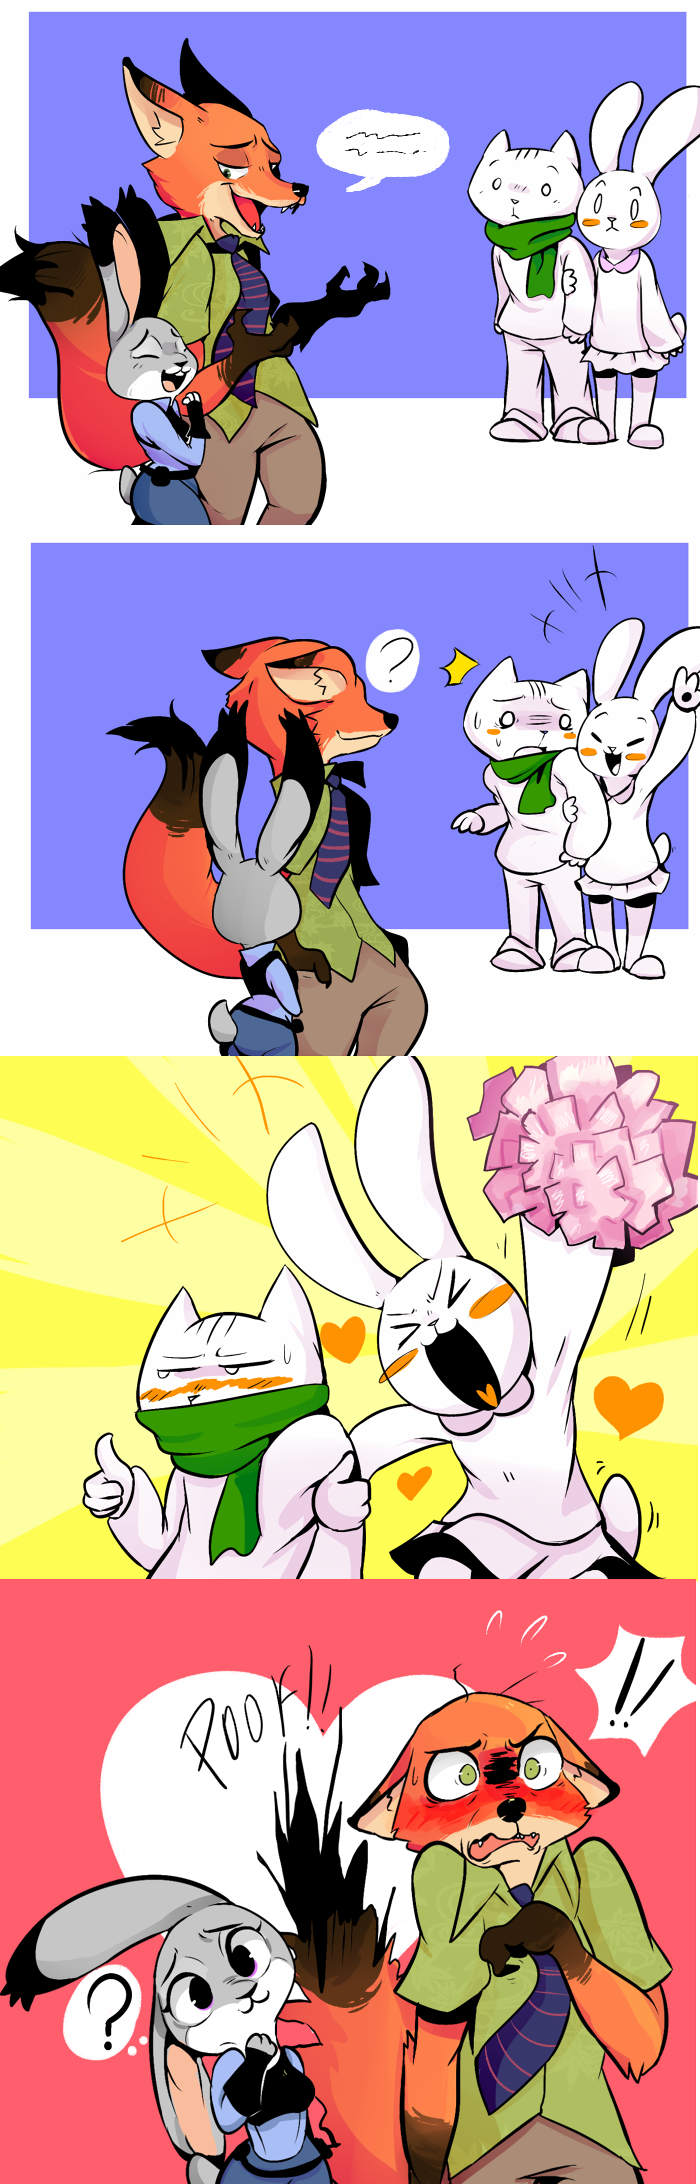 2boys 2girls 4koma :3 blush cat claws comic couple crossover doki fox from_behind furry green_eyes heart highres judy_hopps laughing multiple_boys multiple_girls nabi necktie nick_wilde no_humans pkbunny question_mark rabbit scarf sharp_teeth silent_comic simple_background smile speech_bubble sunburst talking teeth there_she_is!! thought_bubble violet_eyes zootopia